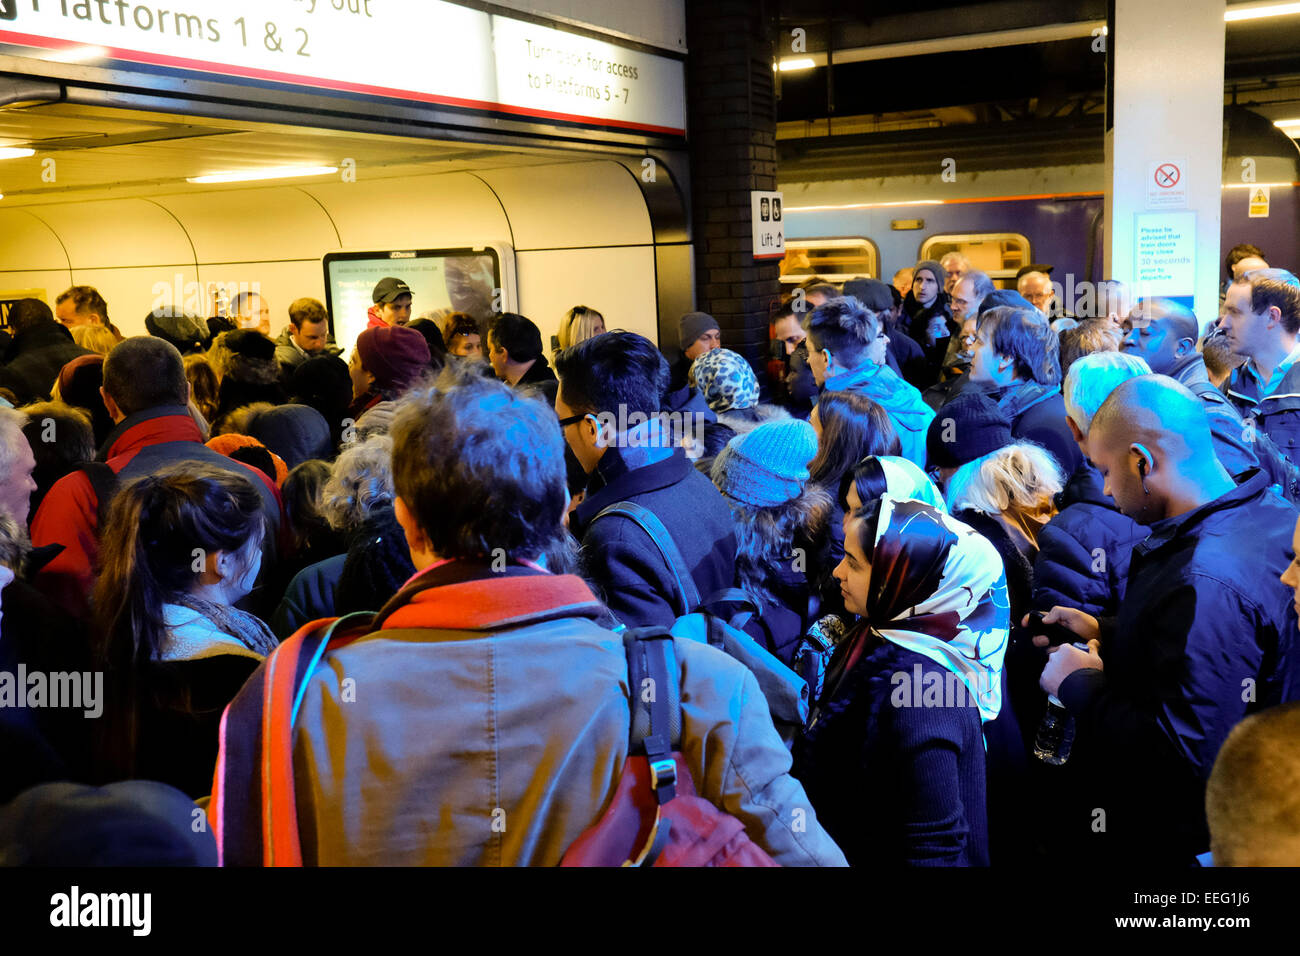 Gatwick Airport, London, UK. 17th Jan, 2015. Southern Rail chaos. The troubled Southern Rail line was thrown into more chaos today as a signaling fault at Three Bridges occurred at the same time as engineering works were taking place on the line. Travelers trying to get from London to the south coast were asked to use at least 3 trains before getting a rail replacement bus service. Pictures show crowds at Gatwick Airport trying to find a way to continue their journey. Credit:  JEP News/Alamy Live News Stock Photo